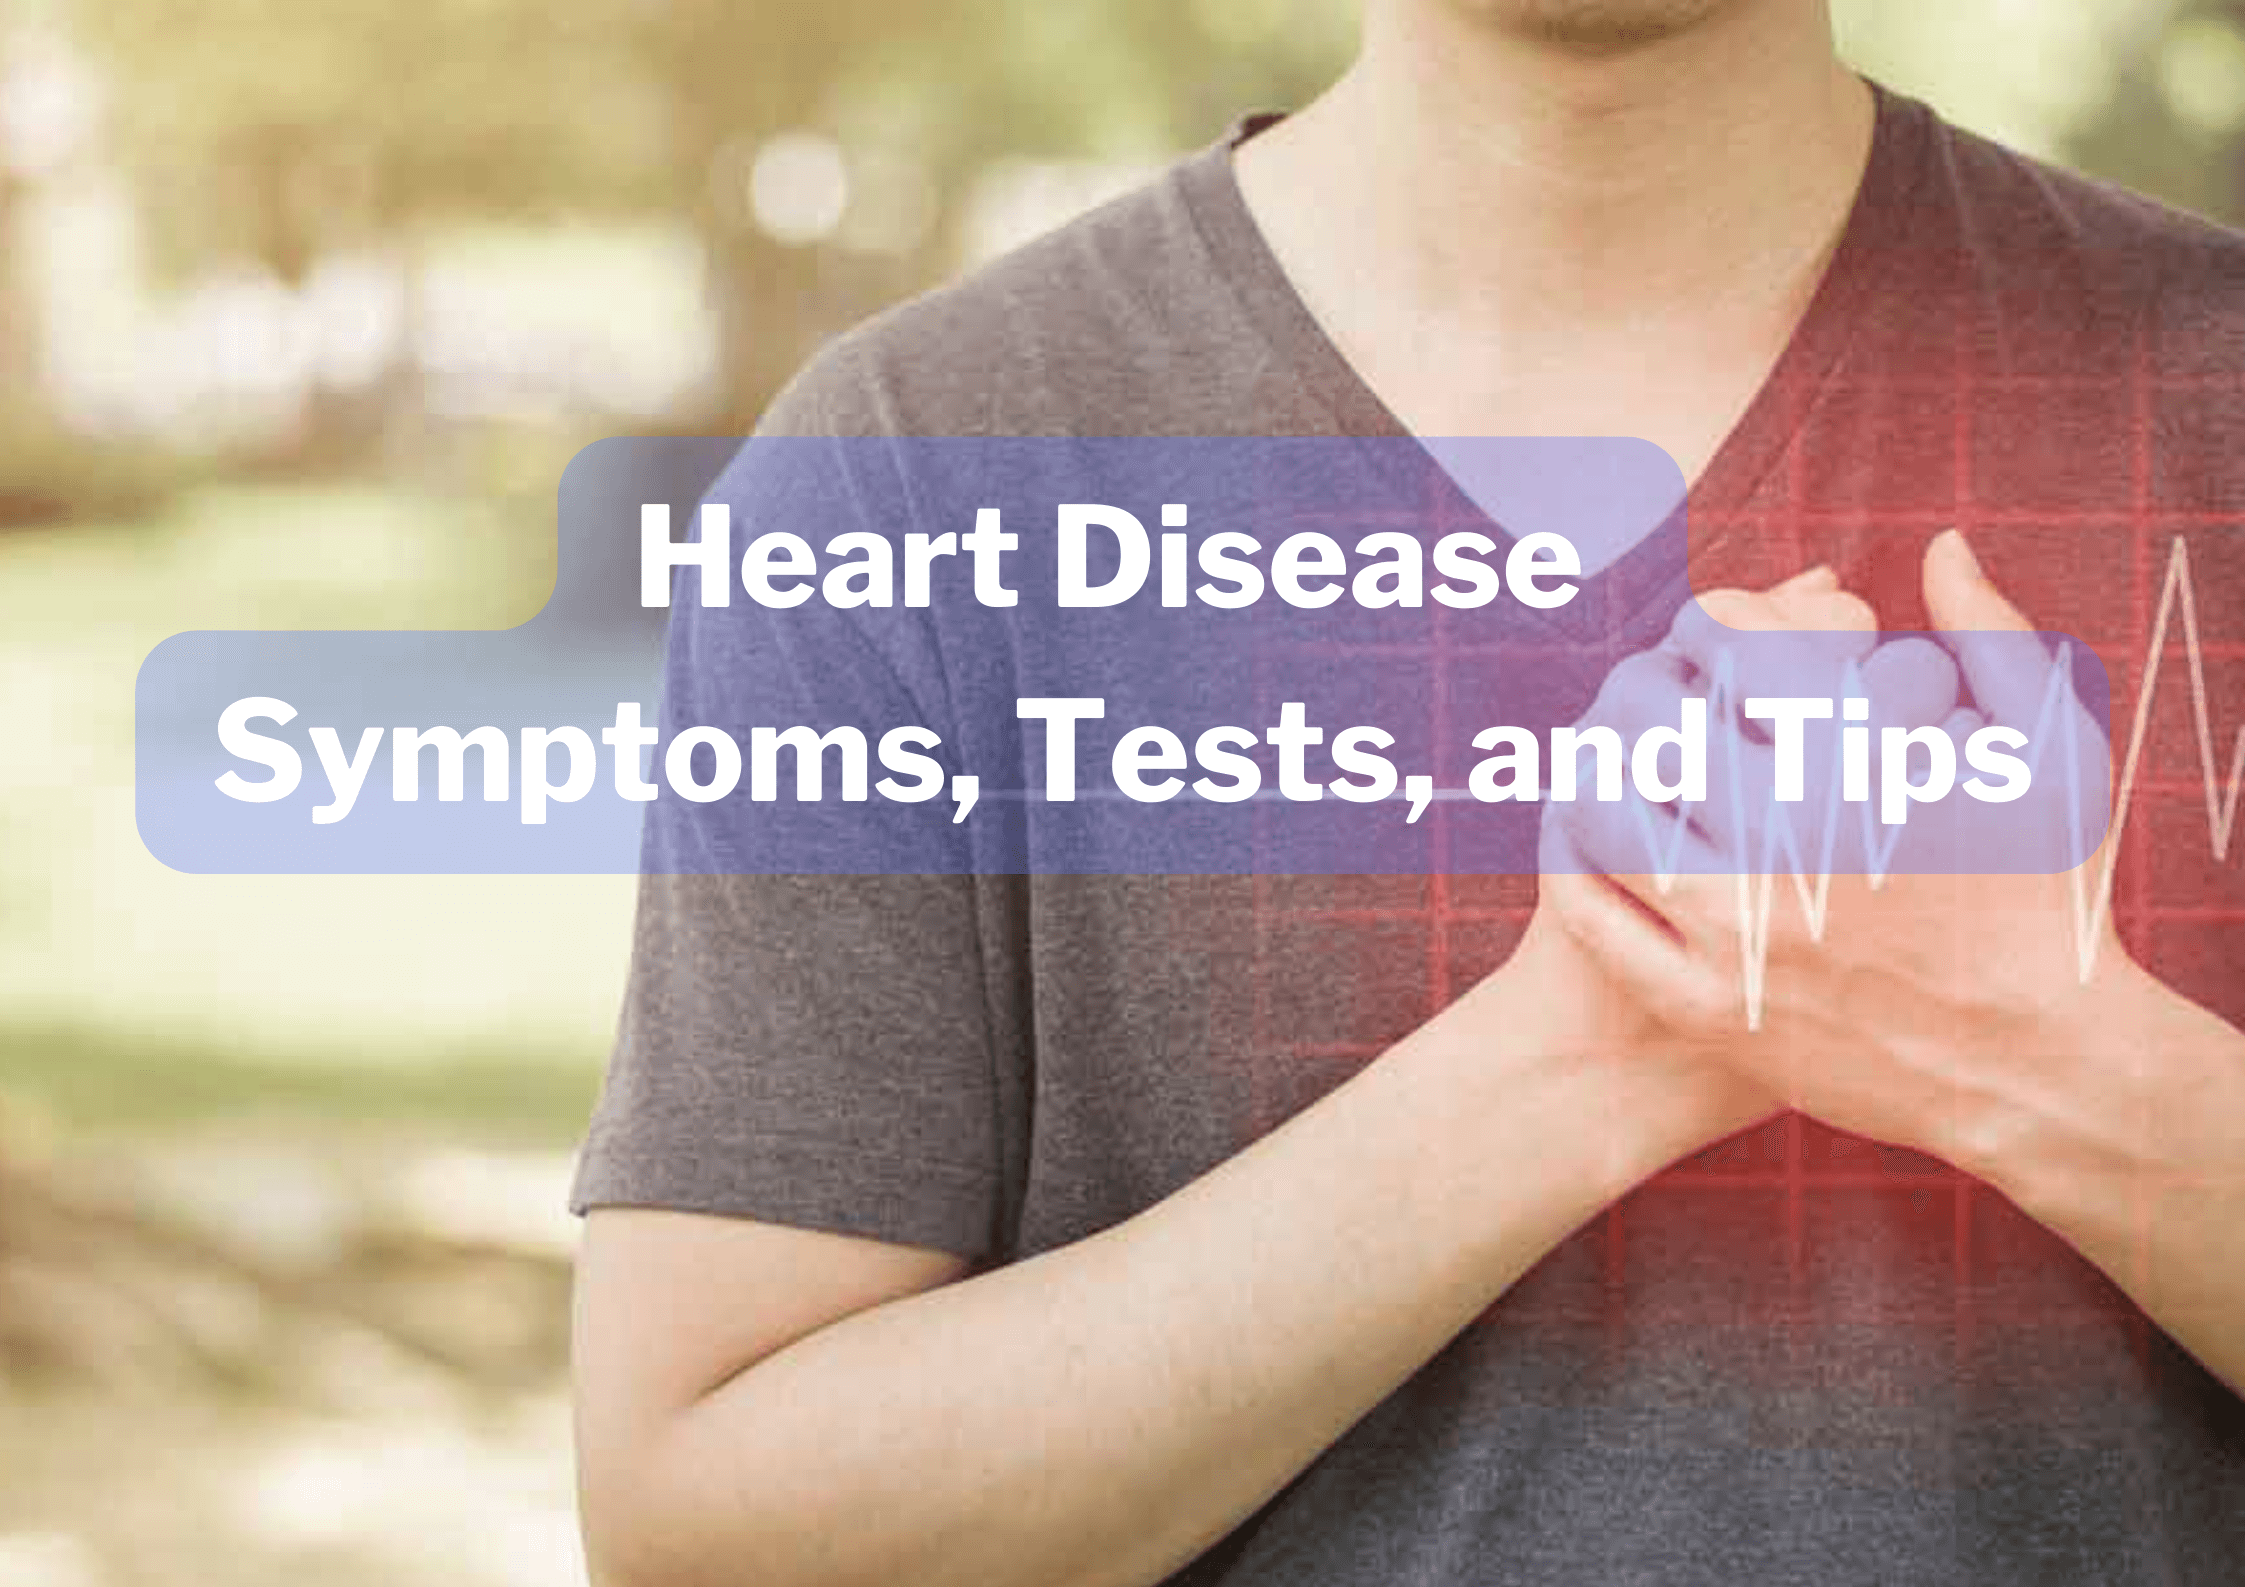 Heart Disease Symptoms, Tests, and Tips